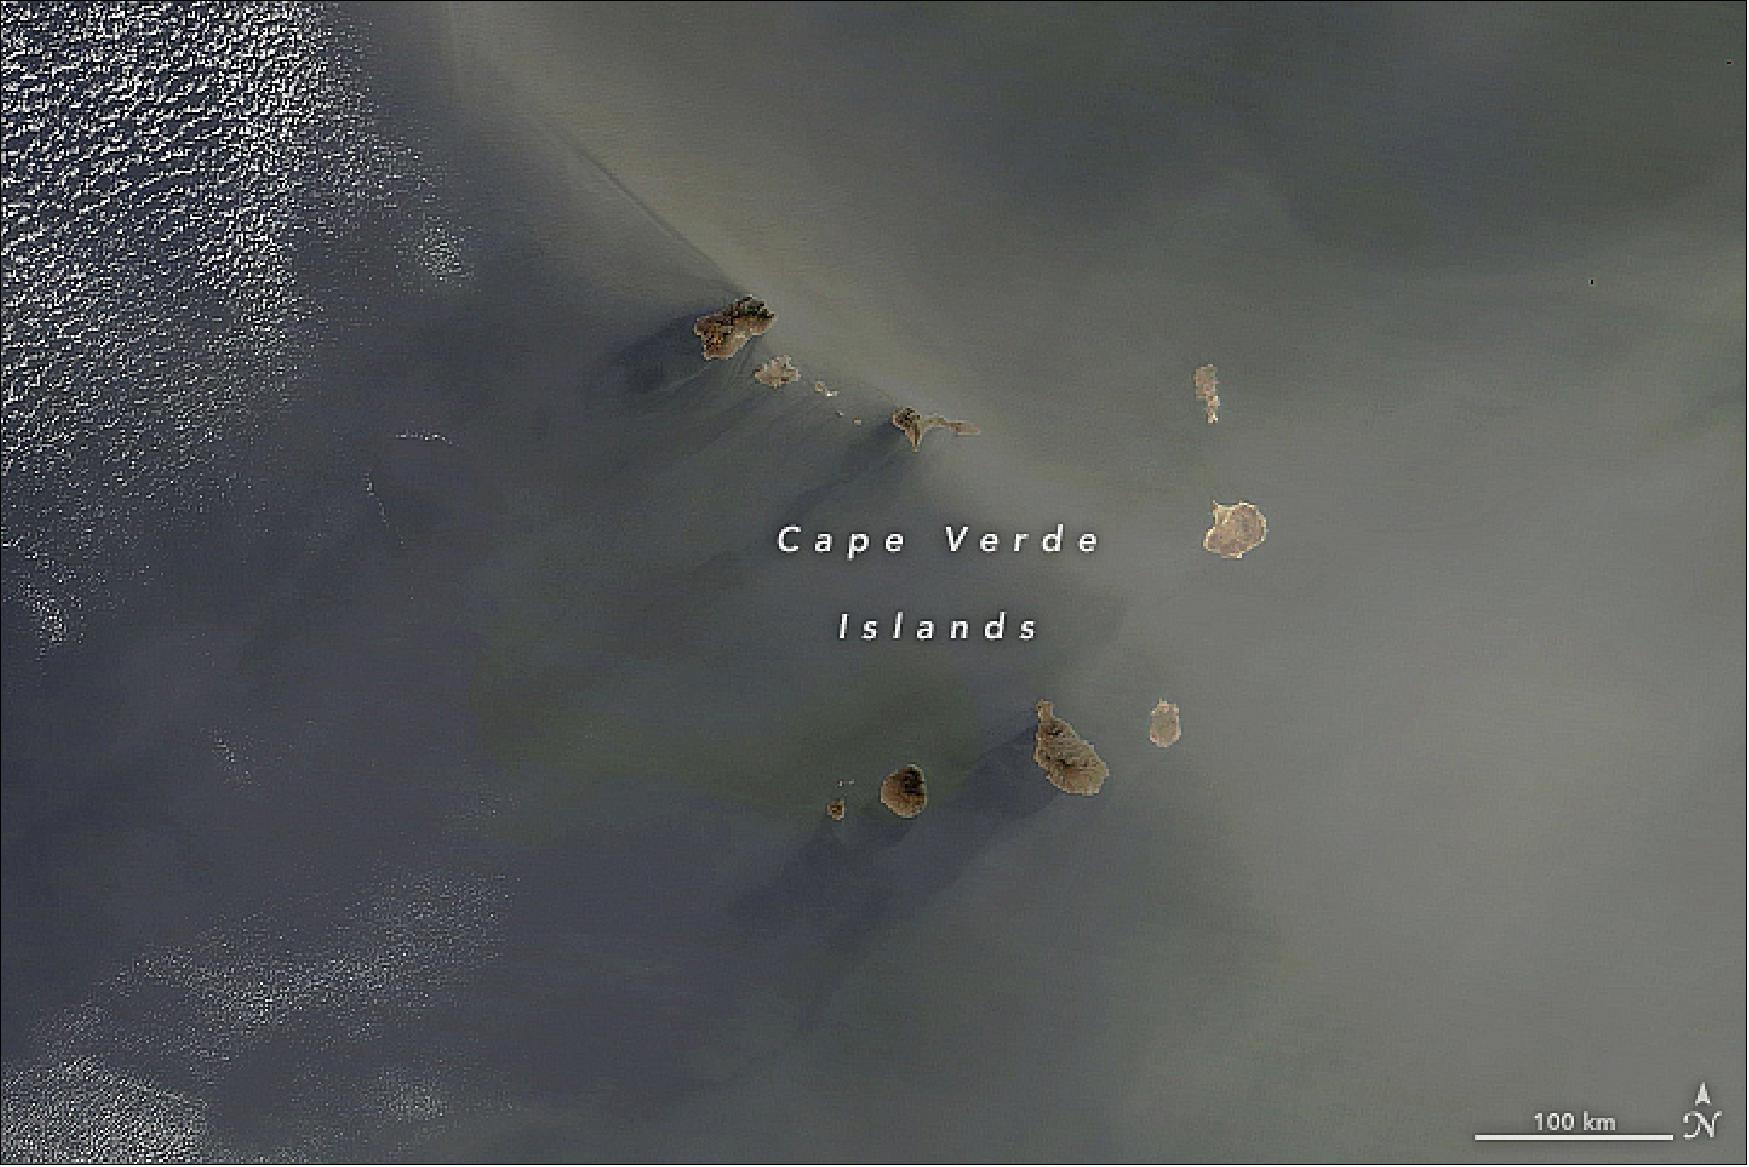 Figure 37: MODIS image of Saharan dust, acquired on 23 Jan. 2018, bathing the Cape Verde islands - Note, how much denser the dust plume grows on the second day (image credit: NASA Earth Observatory, images by Joshua Stevens and Jeff Schmaltz, using MODIS data from LANCE/EOSDIS Rapid Response. Story by Mike Carlowicz and Holli Riebeek)